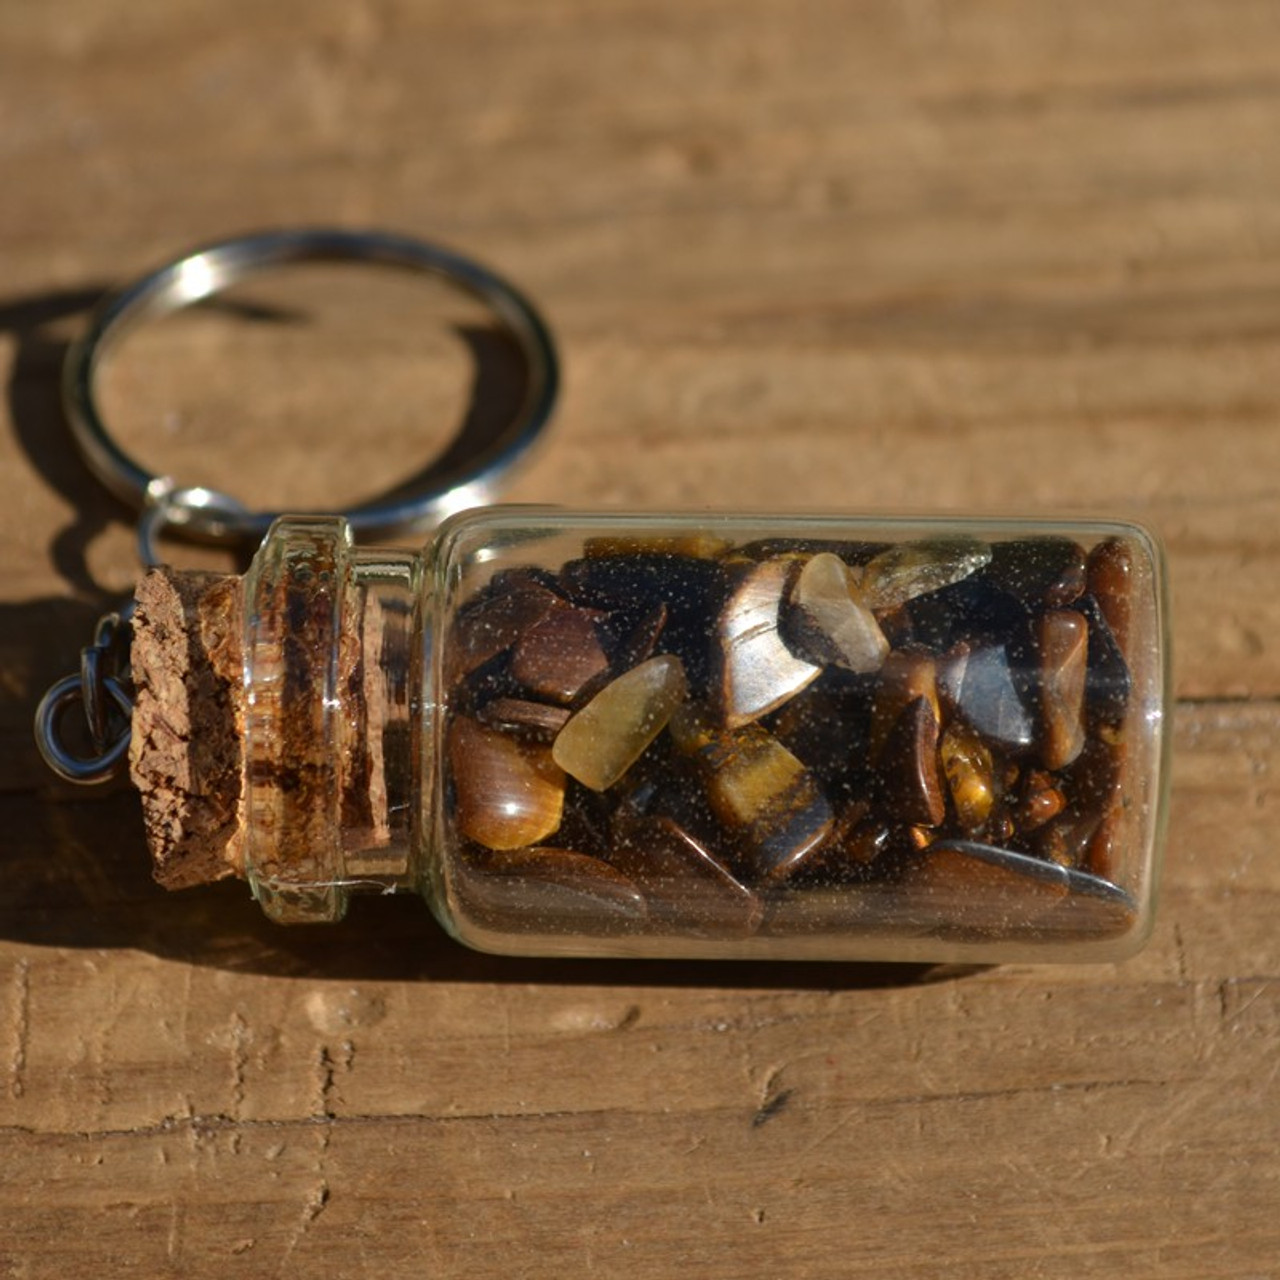 Gold Tiger's Eye Stones in a Glass Vial Keychain